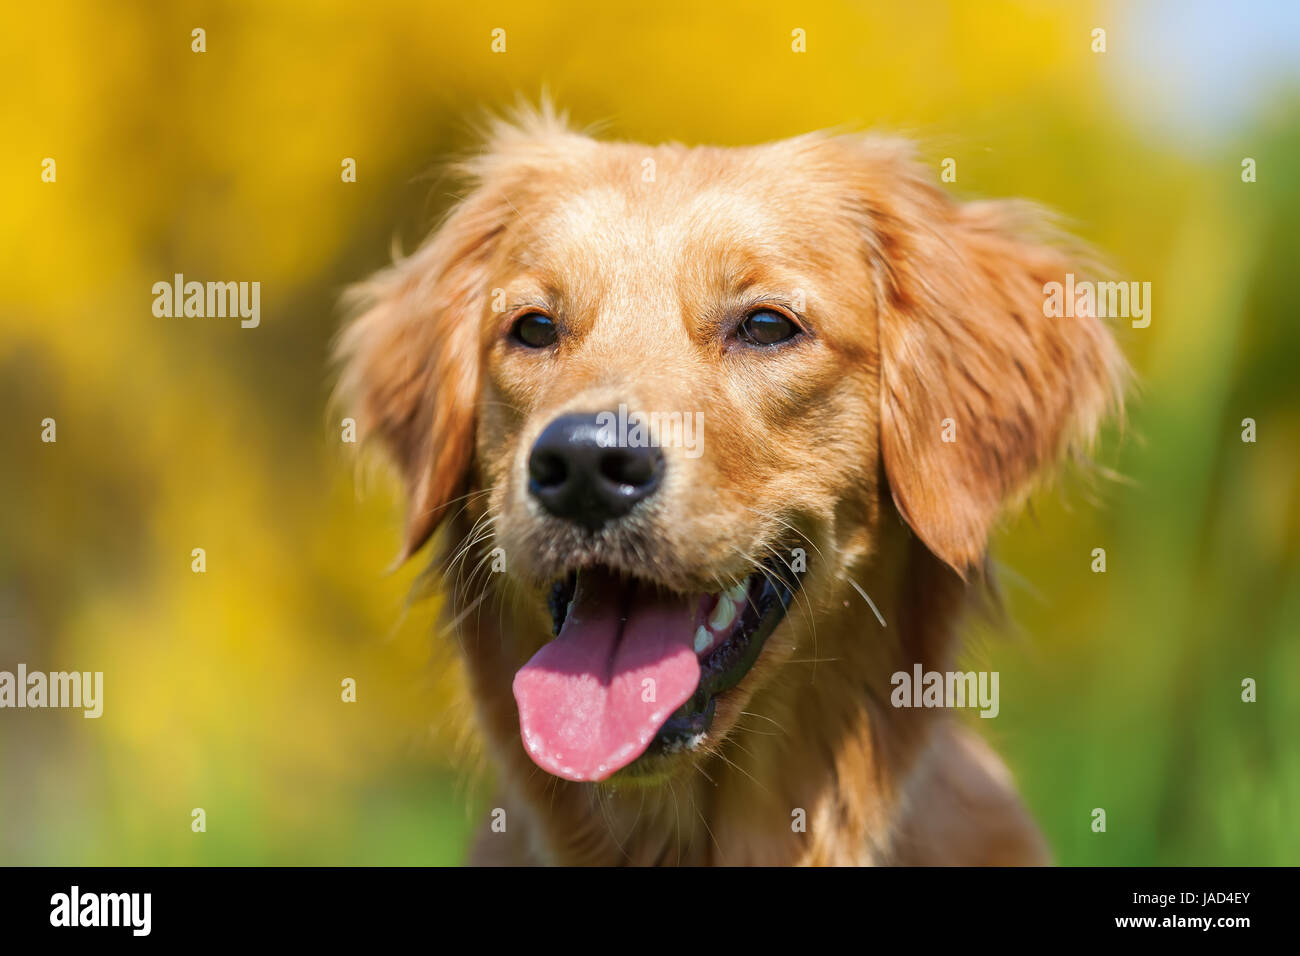 head portrait picture of a young golden retriever Stock Photo